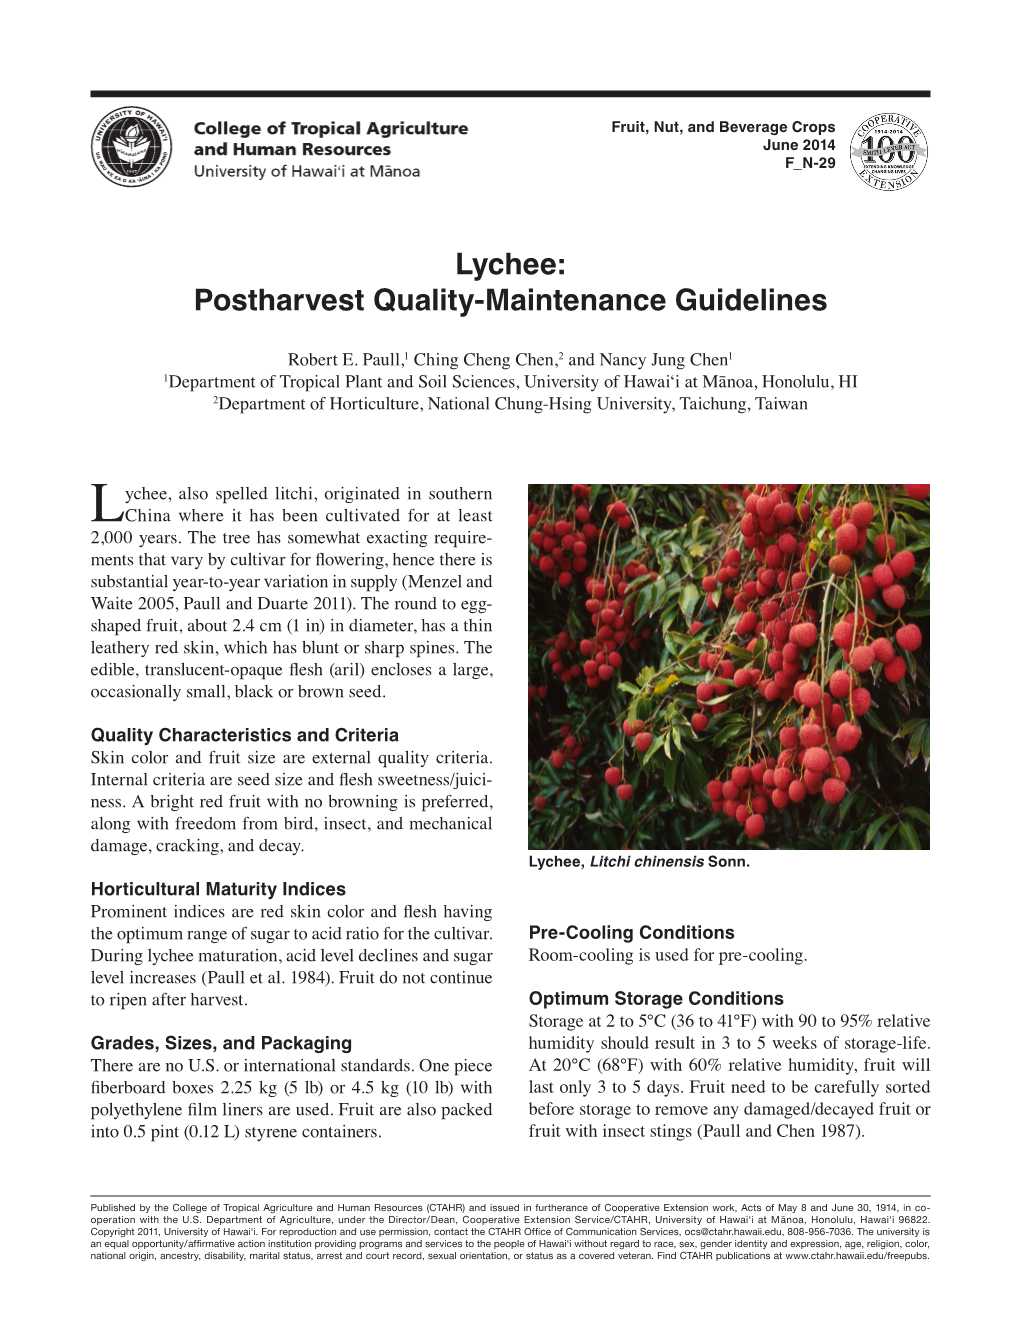 Lychee: Postharvest Quality-Maintenance Guidelines